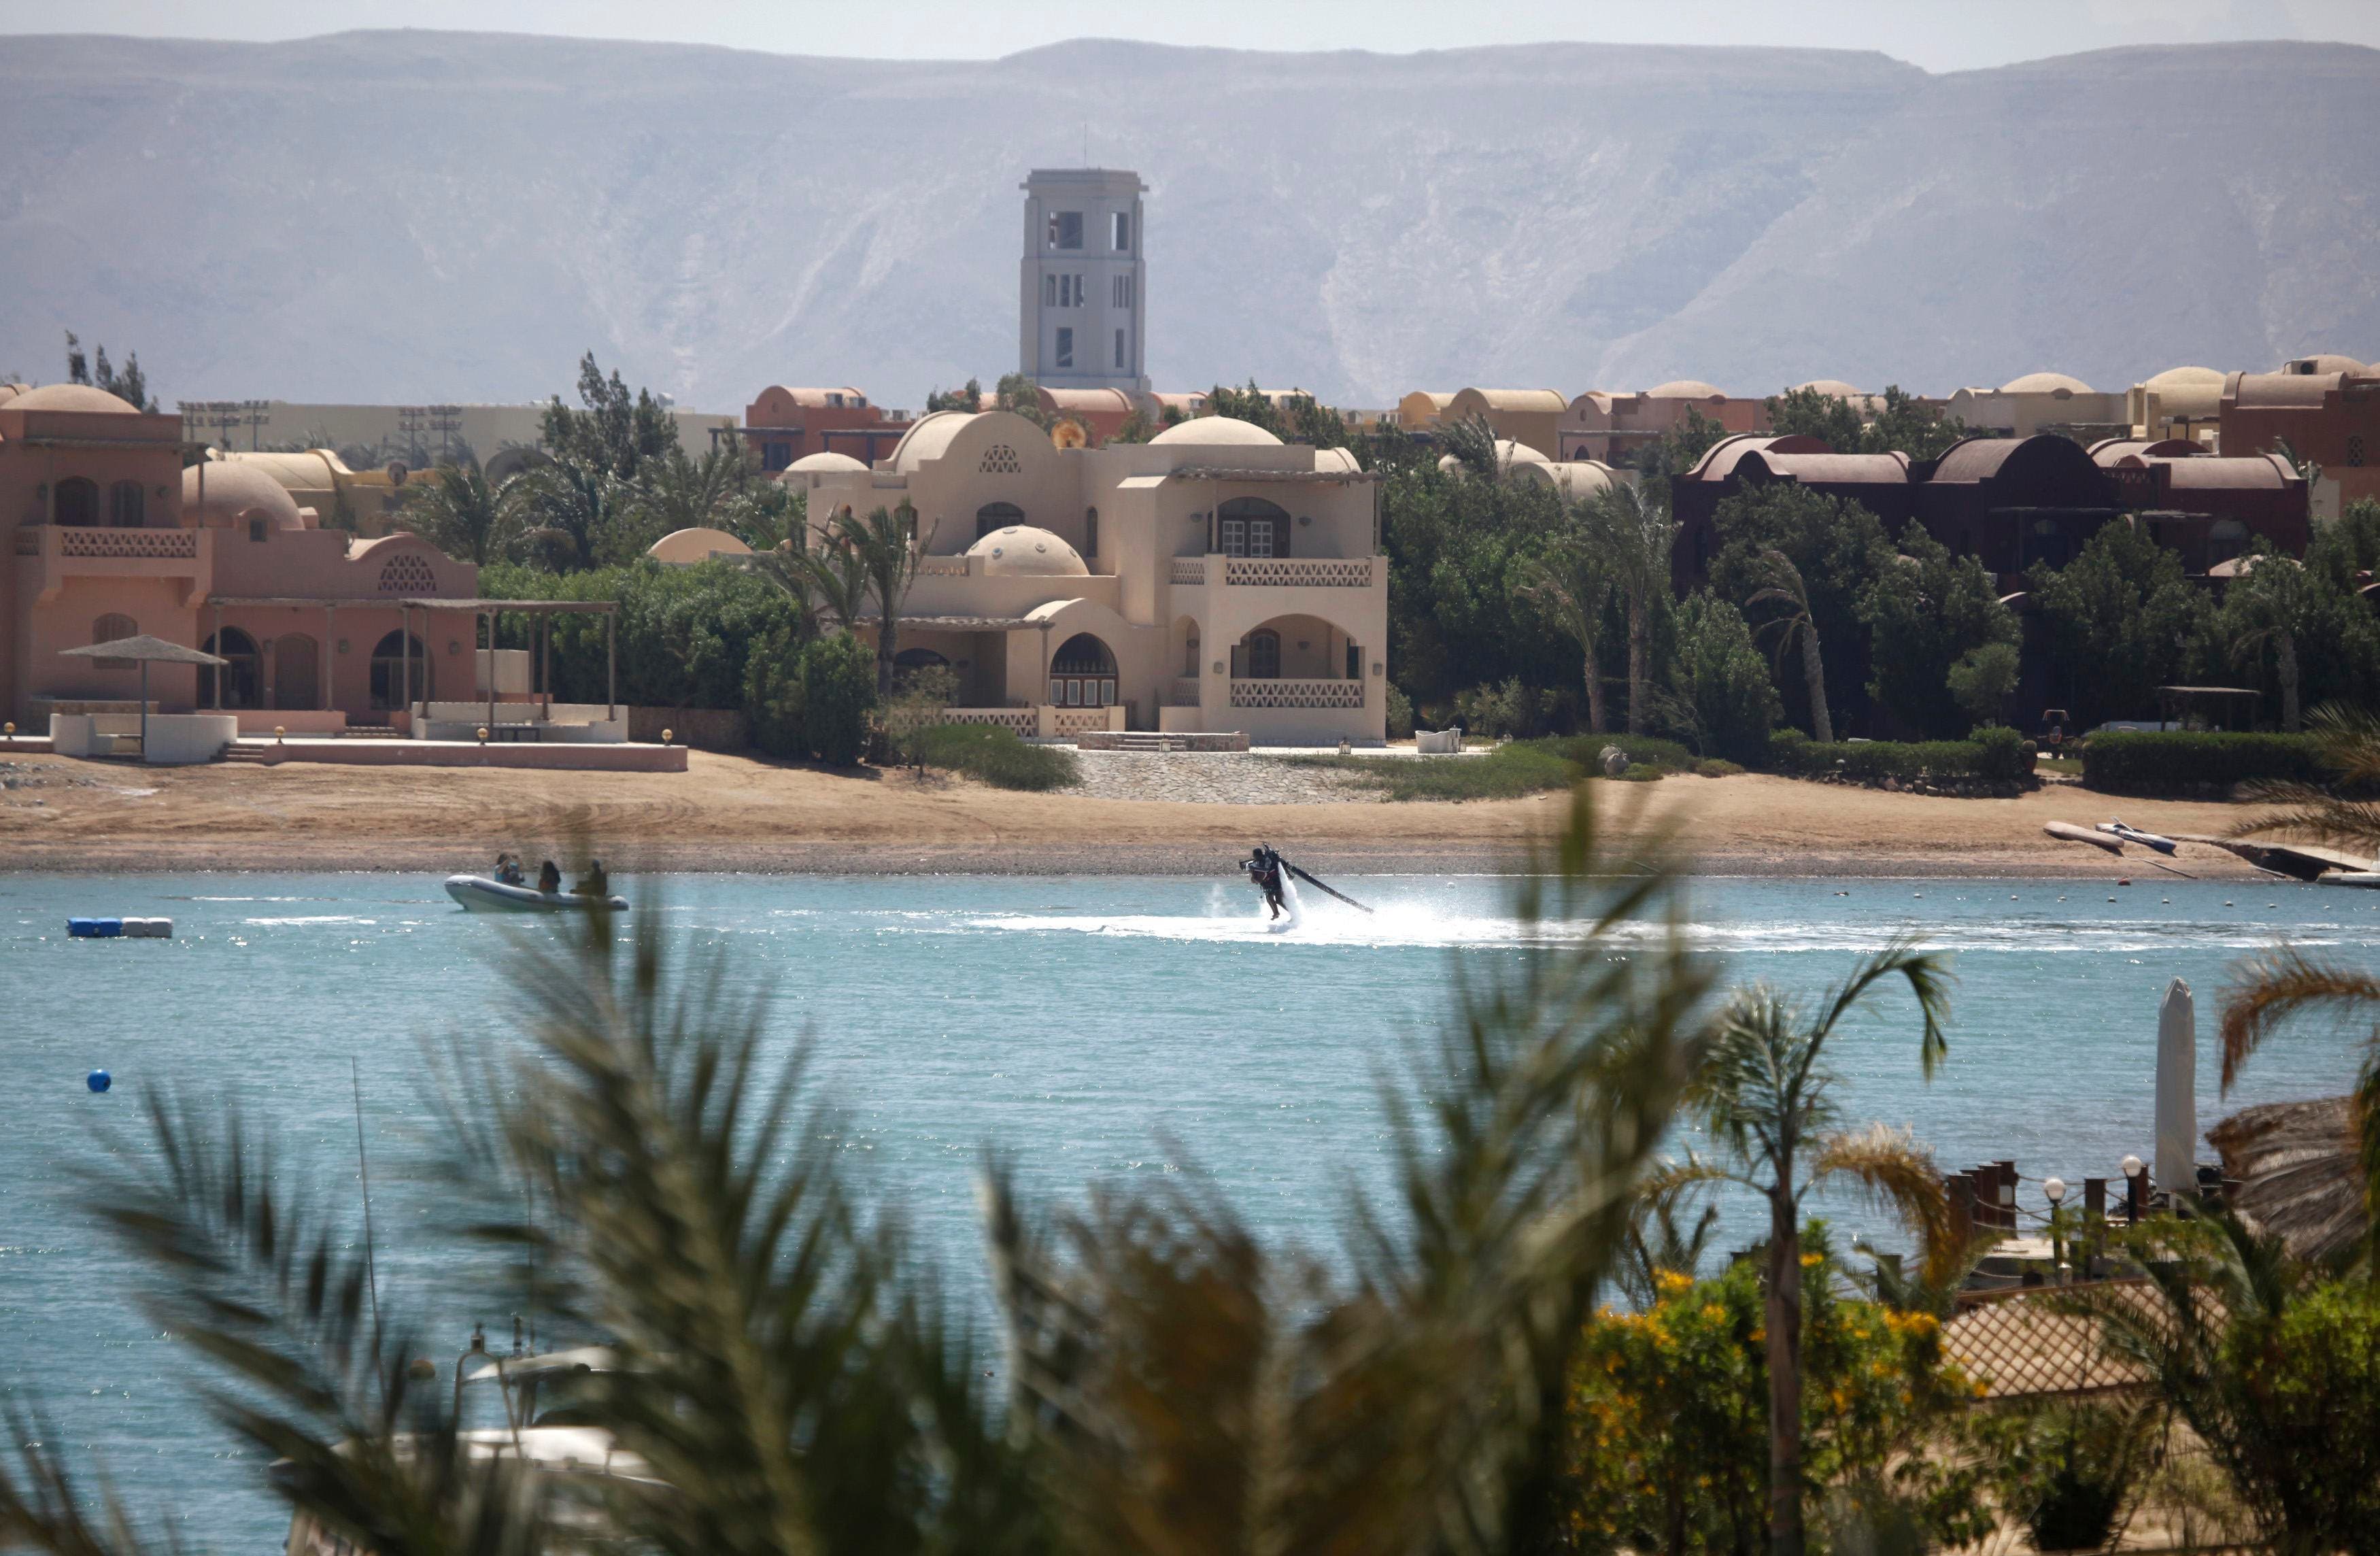 Egypt’s tourism hit hard by crisis